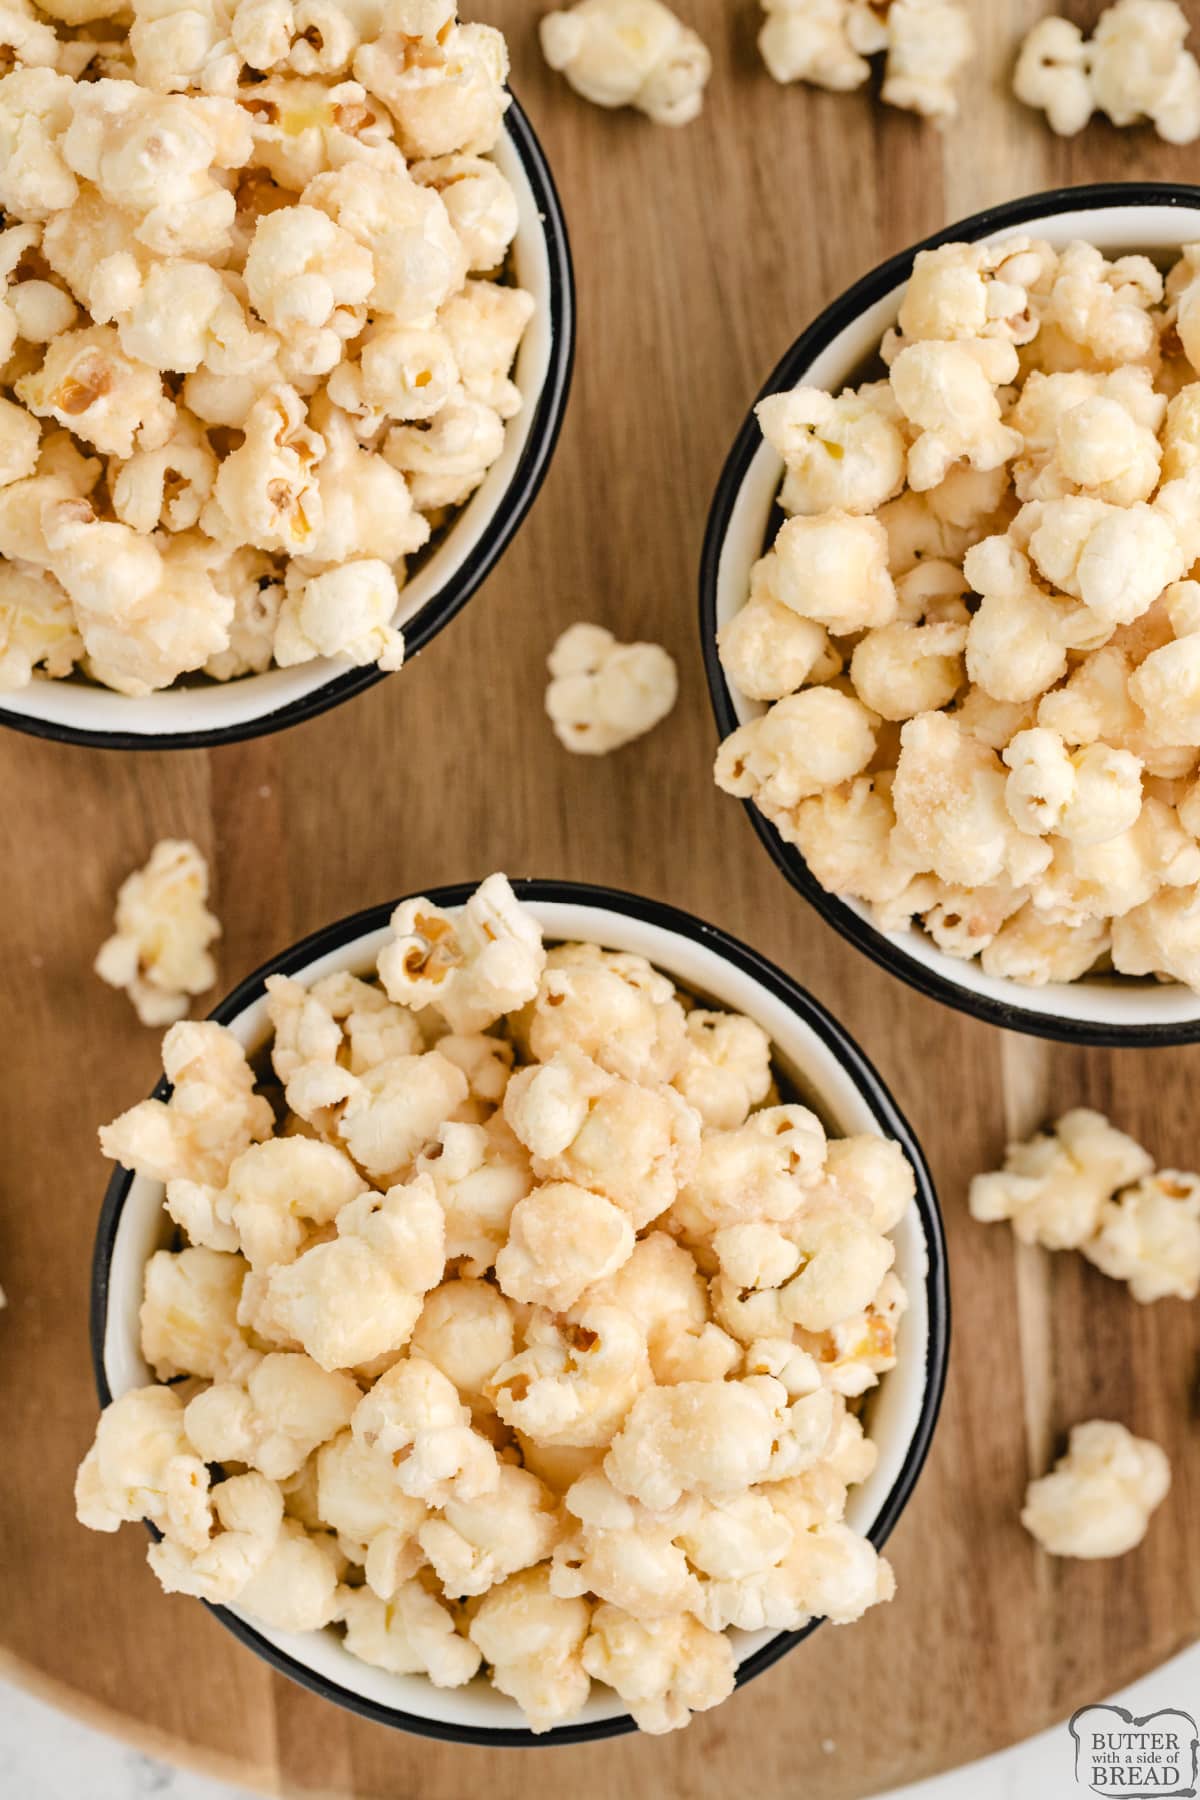 Popcorn recipe made with sugar, cream and butter